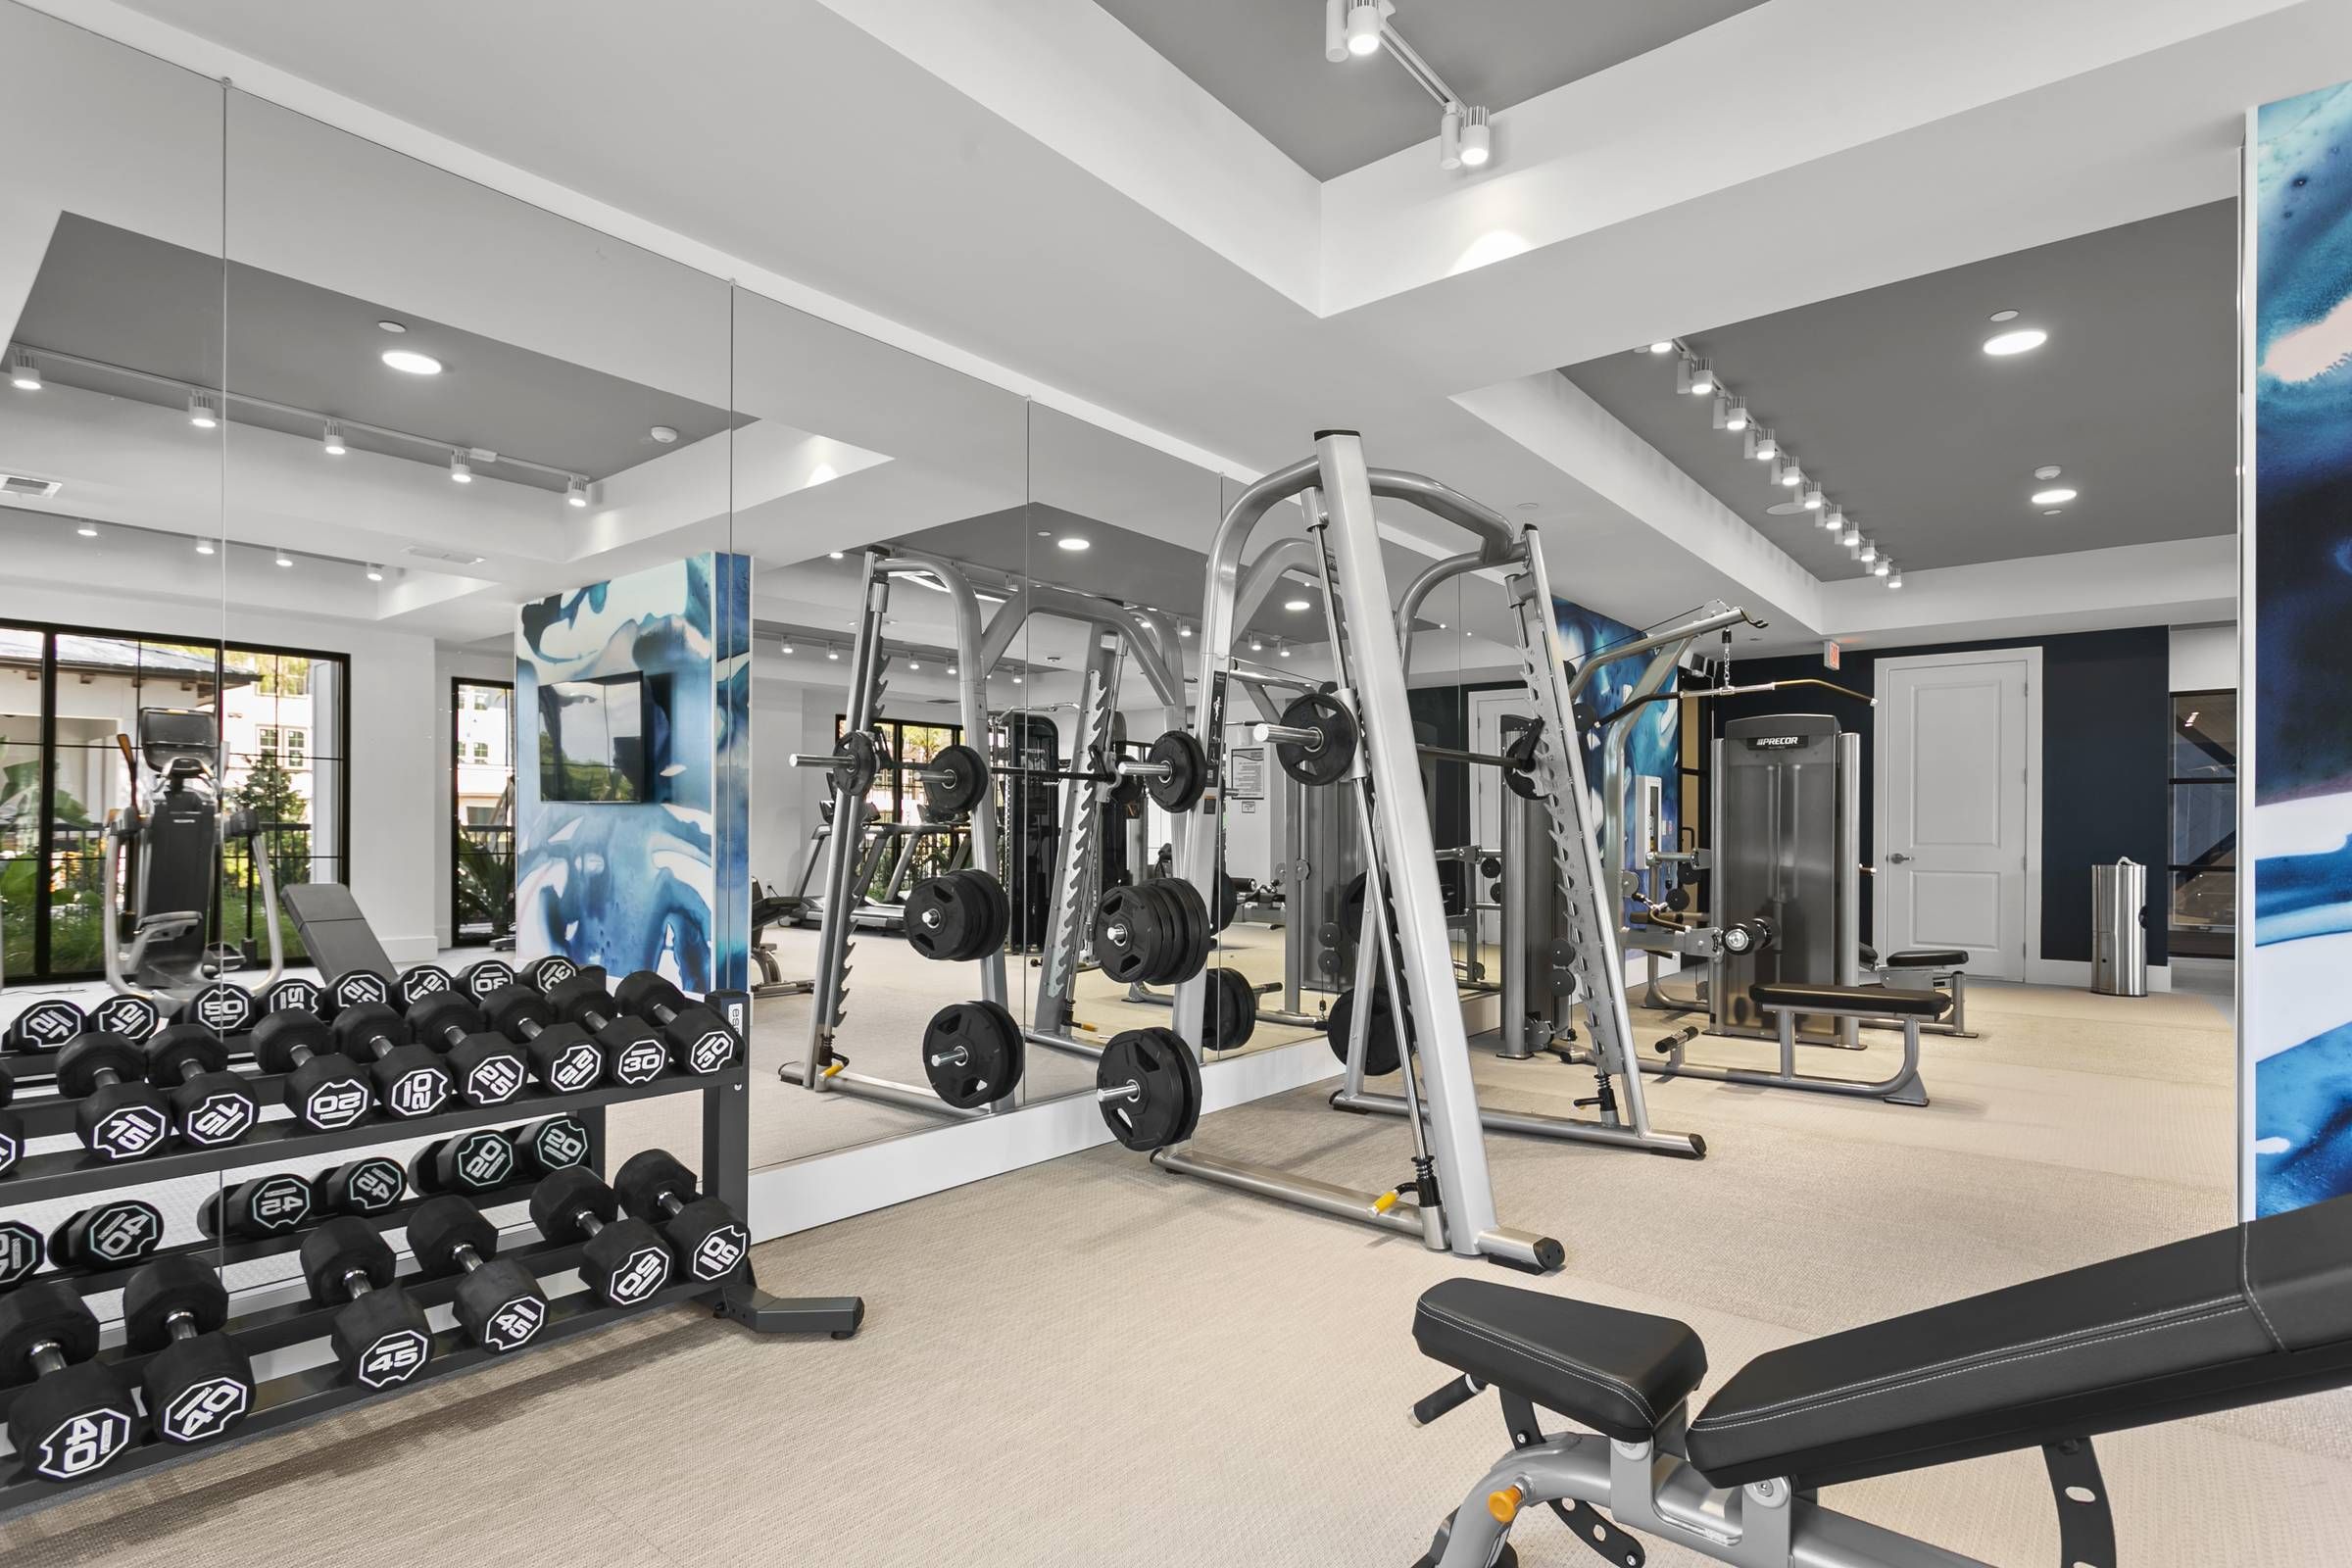 A state-of-the-art fitness center at Alta Clearwater, well-equipped with weights and exercise machines, overlooking a sunny outdoor patio.